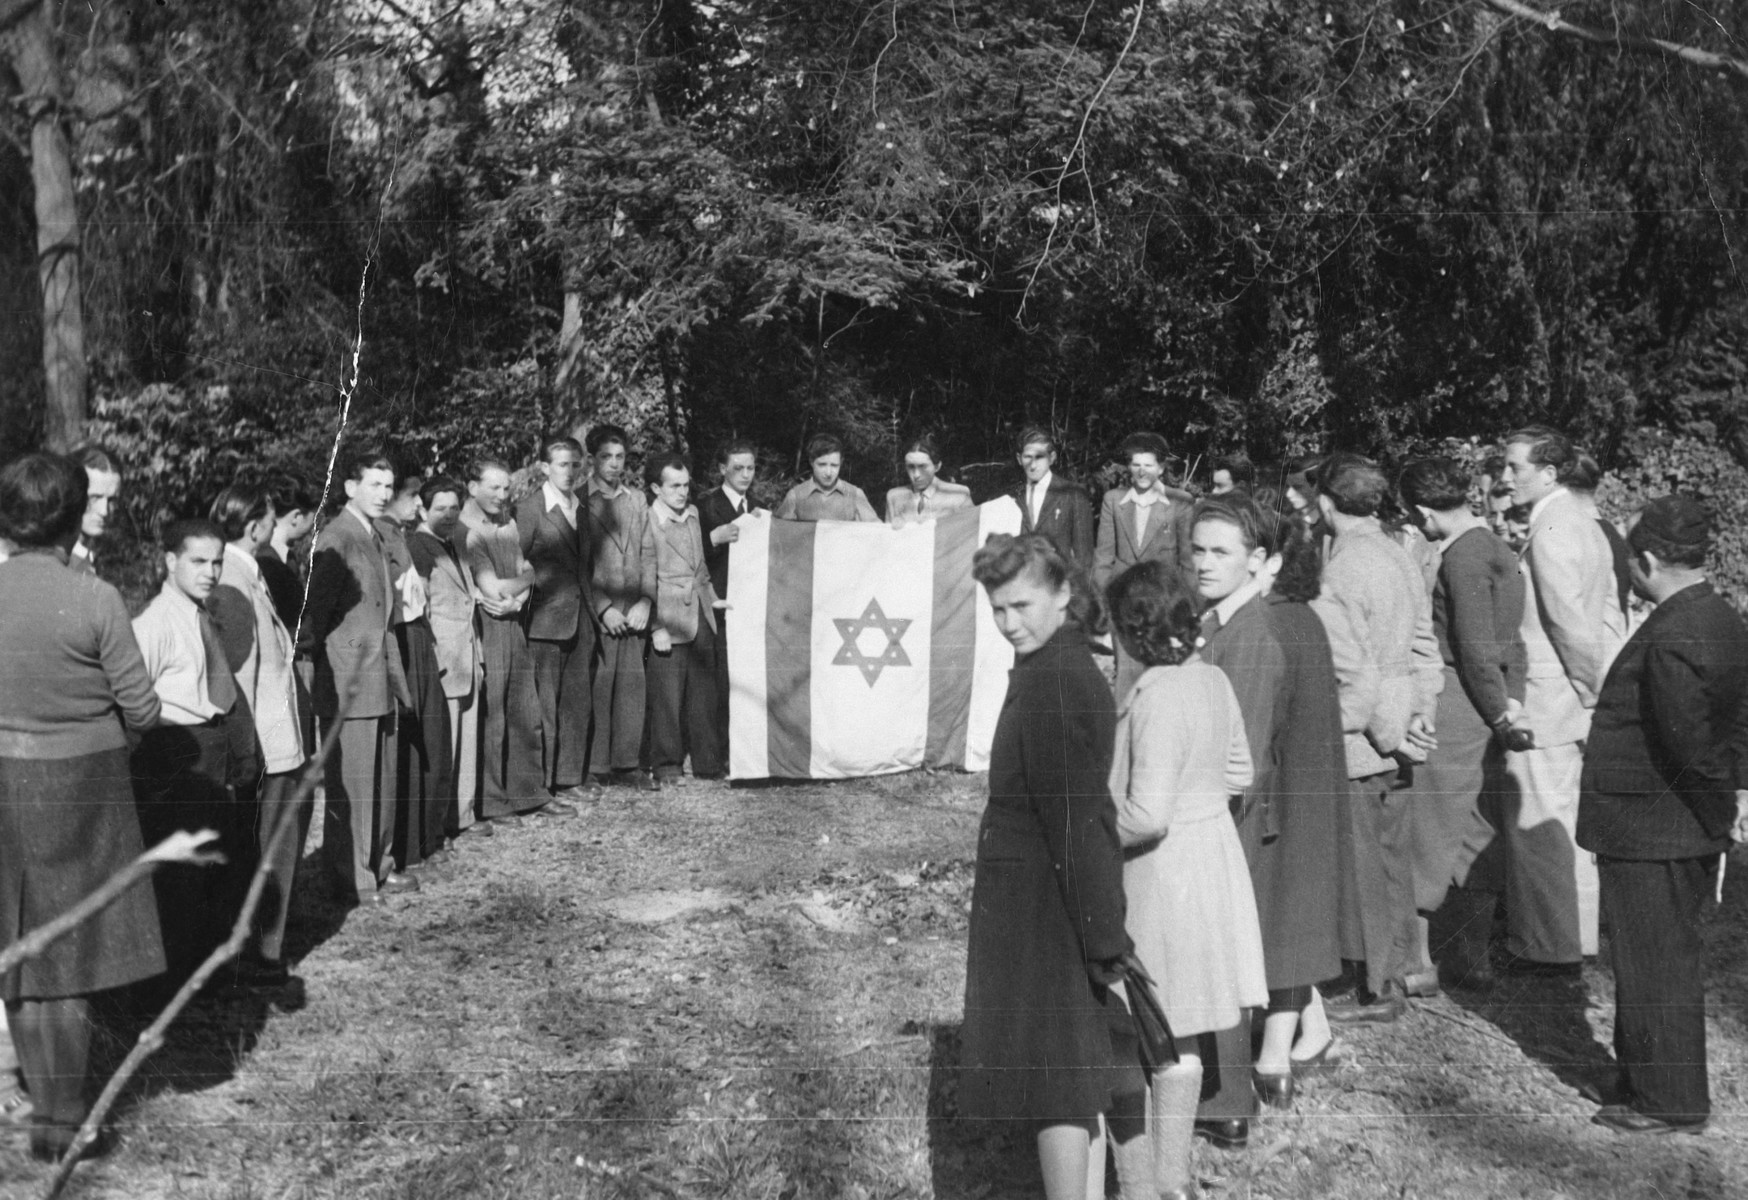 Jewish youth gather for a ceremony around a large Zionist flag in a children's home in Switzerland.

Moniek Szmulewicz is among those pictured.  Monek 
Goldfinger is standing on the far right in a light colored suit.